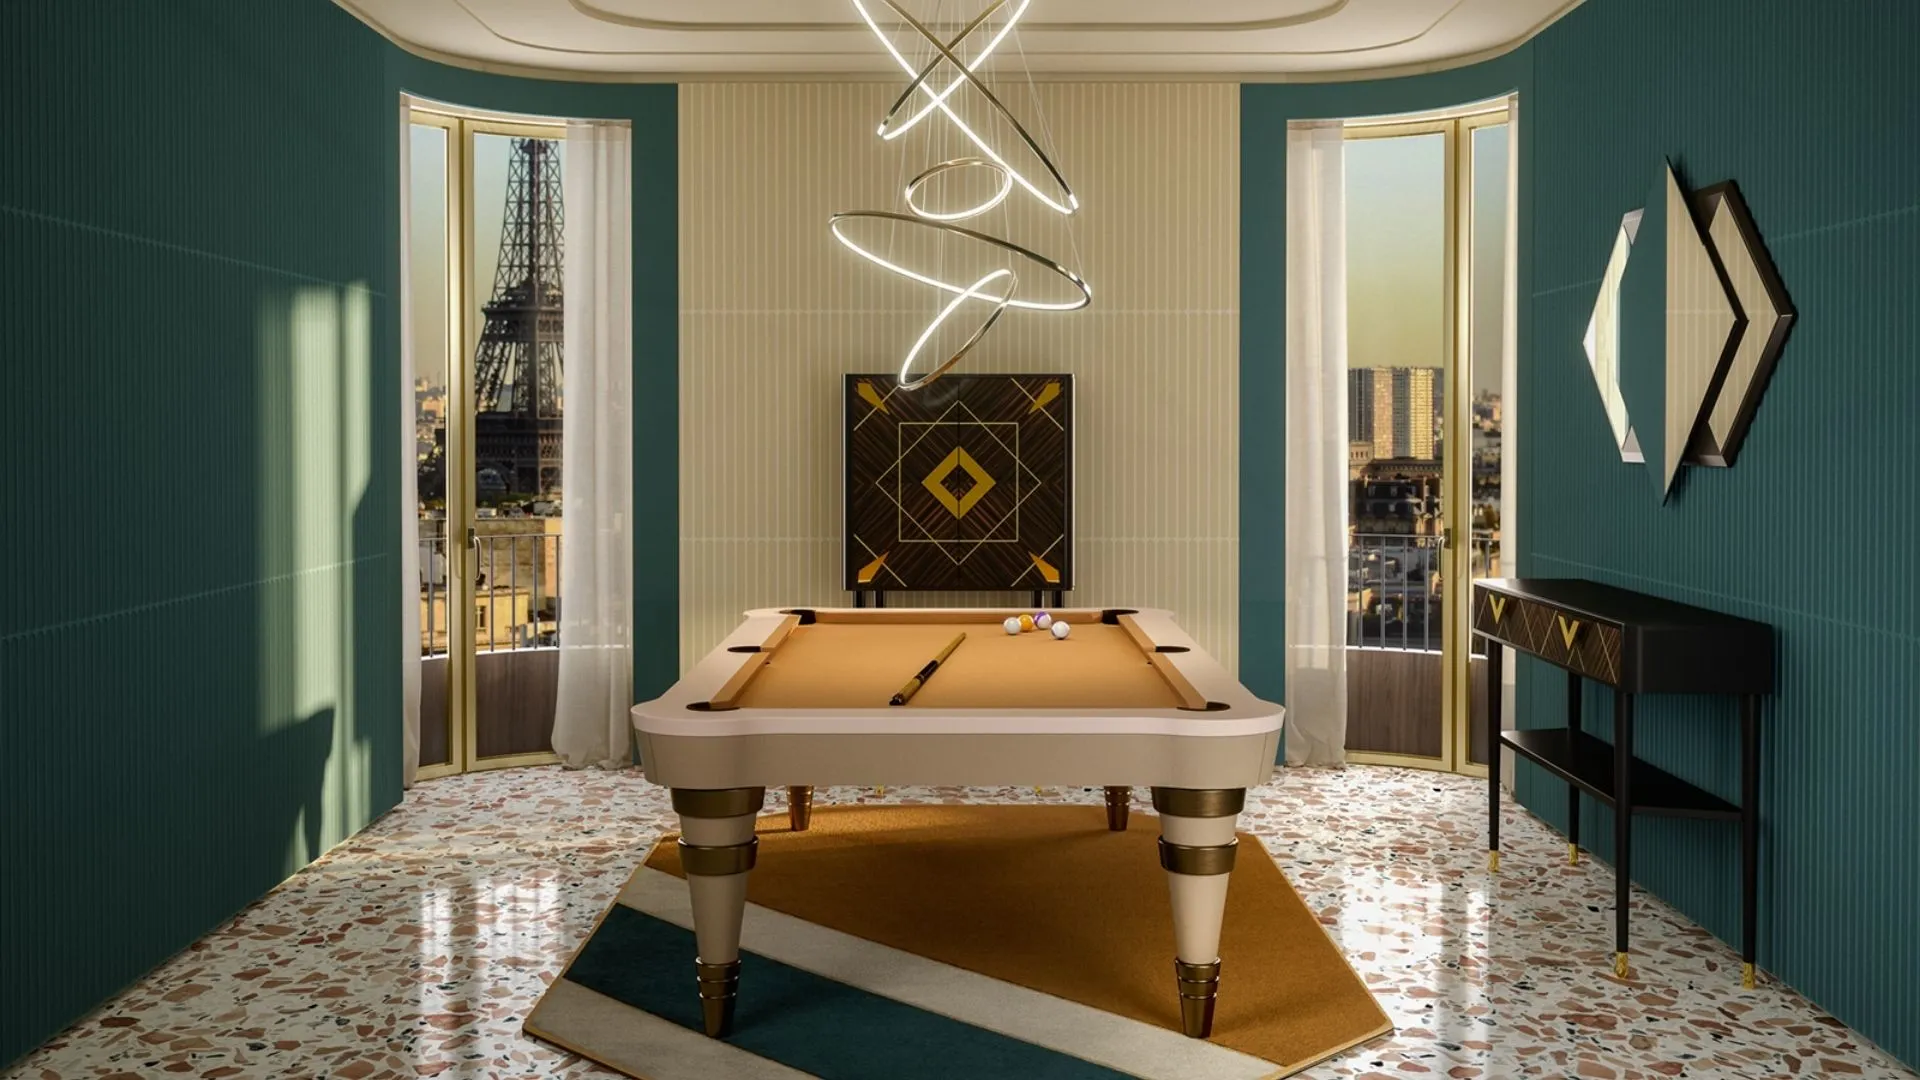 luxury pool table made in italy with camel cloth and bronze details